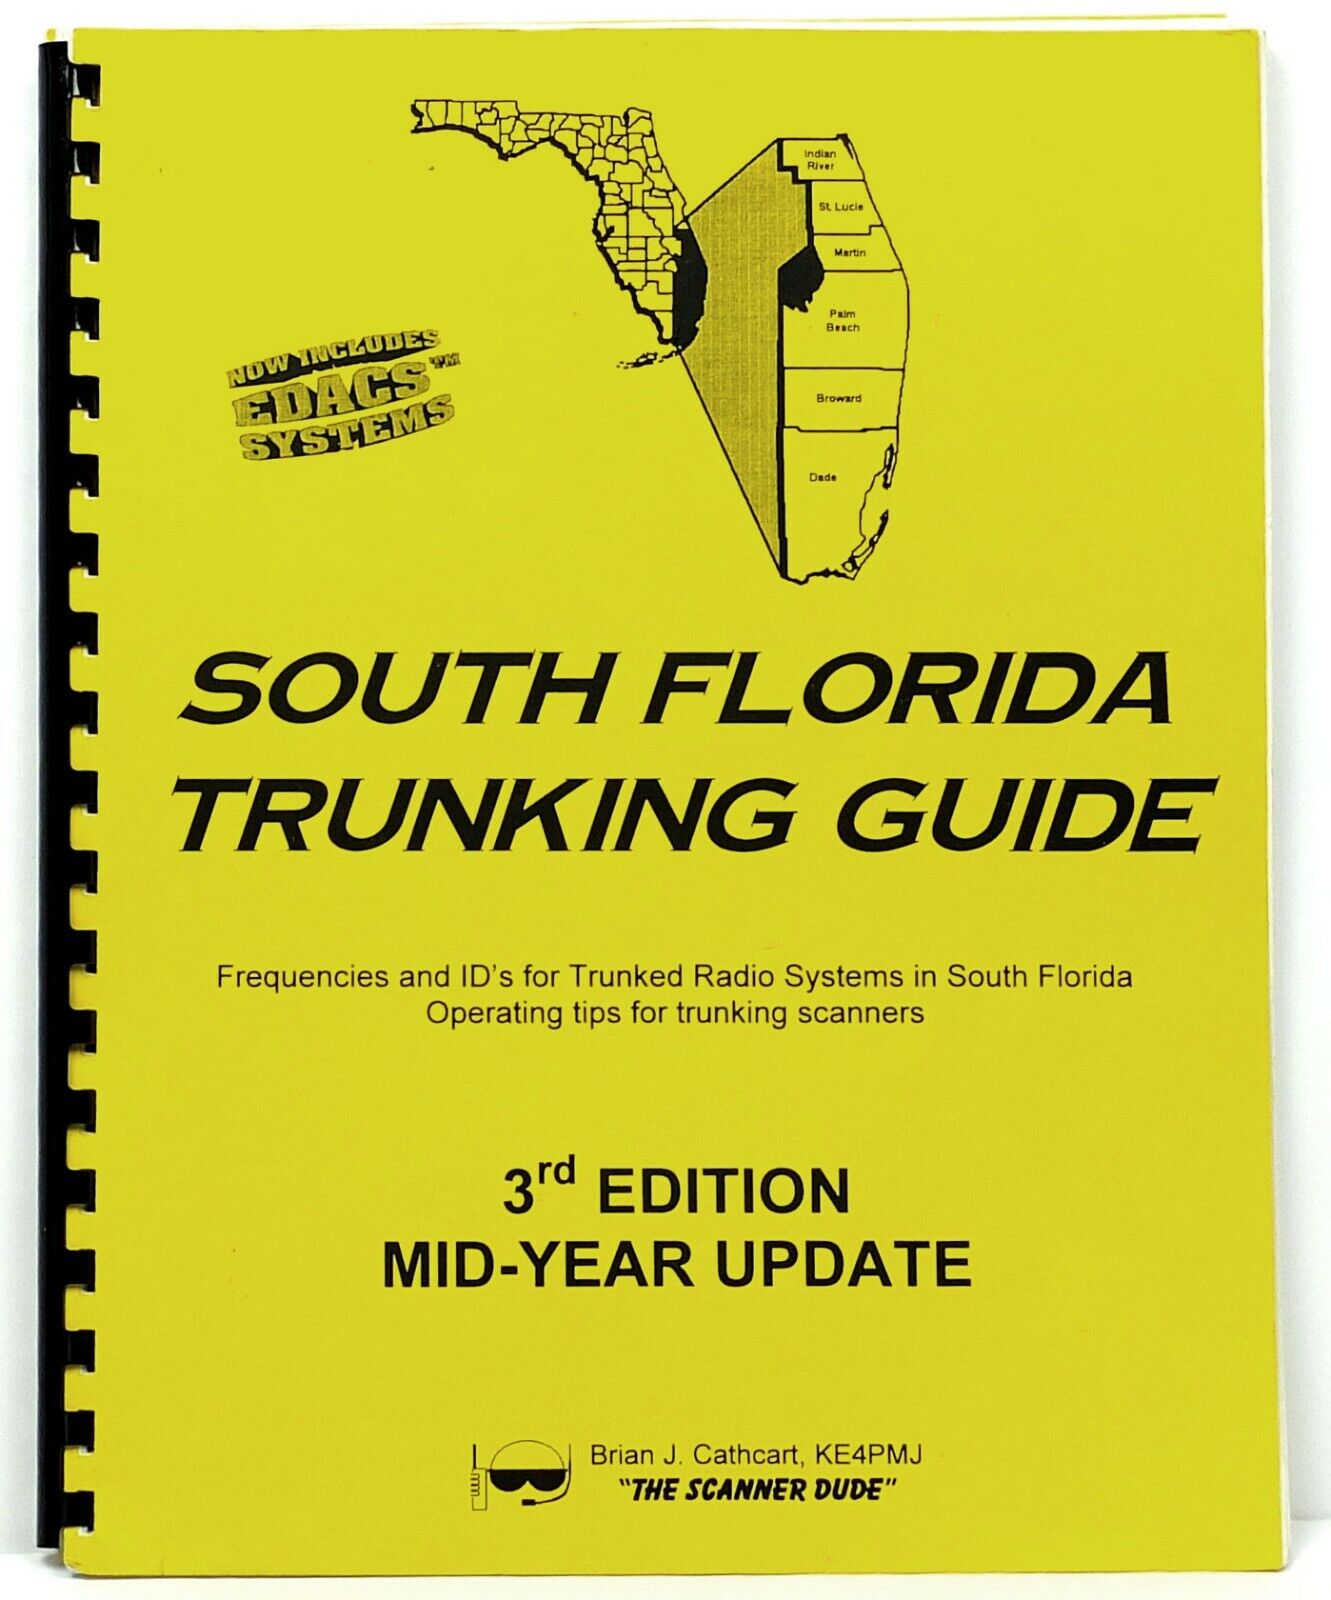 SOUTH FLORIDA FREQUENCY AND TRUNKING GUIDE VERSION 3 - BRIAN J. CATHCART KE4PMJ